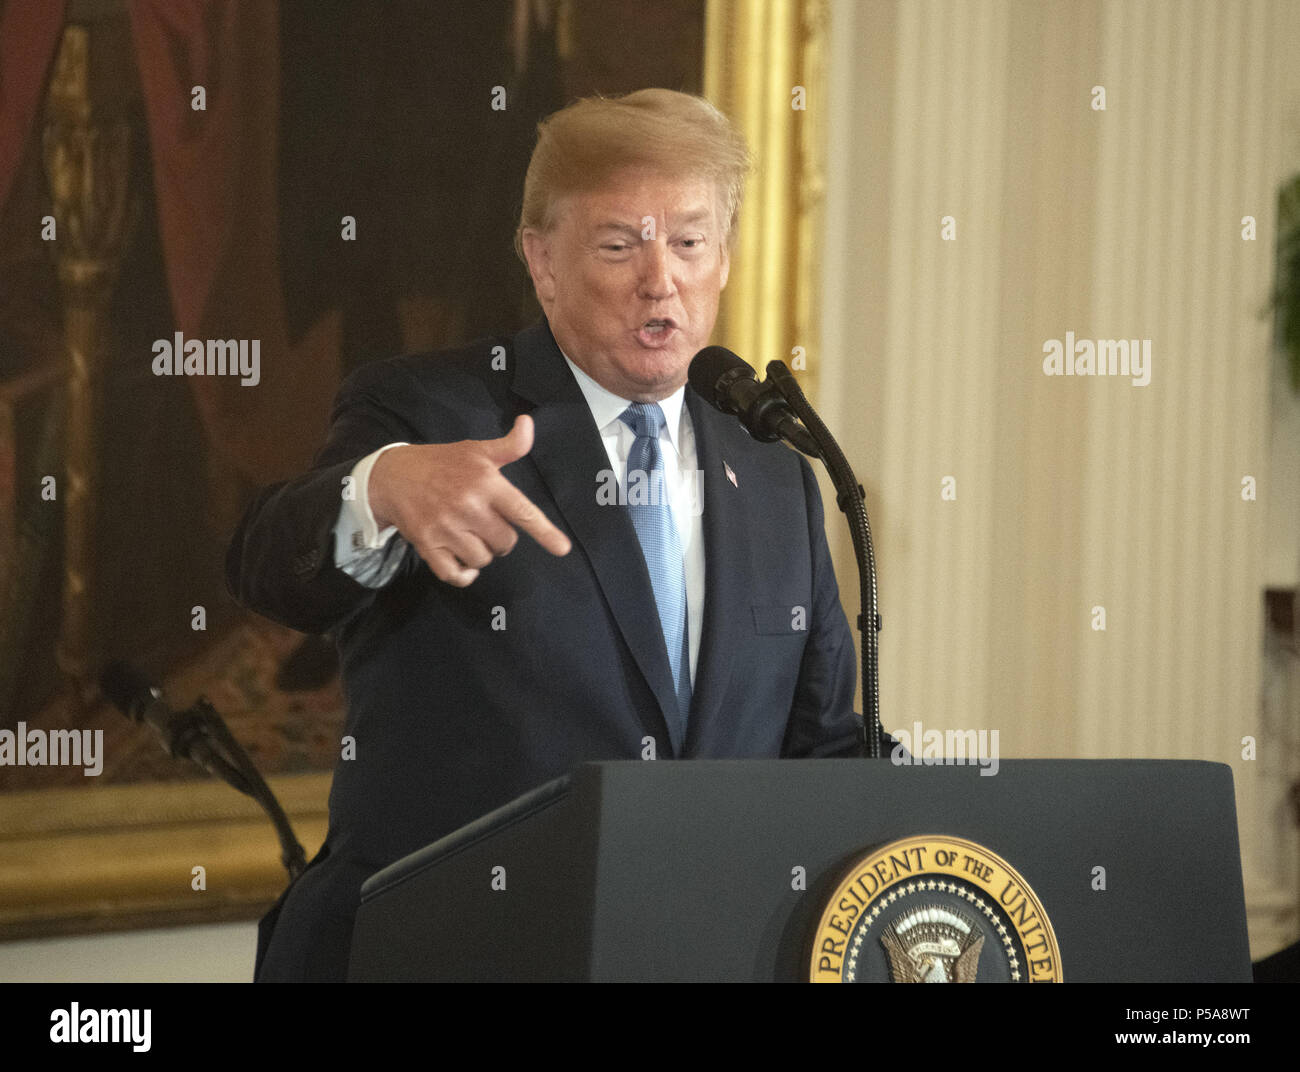 Washington DC, USA. 26th June, 2018. - United States President Donald J. Trump makes remarks as he hosts a ceremony to posthumously award the Medal of Honor to then-First Lieutenant Garlin M. Conner, U.S. Army, for conspicuous gallantry during World War II in the East Room of the White House in Washington, DC on Tuesday, June 26, 2018. Conner is being honored for his actions on January 24,1945, while serving as an intelligence officer with Headquarters and Headquarters Company, 3d Battalion, 7th Infantry Regiment, 3d Infantry Division. Credit: ZUMA Press, Inc./Alamy Live News Stock Photo